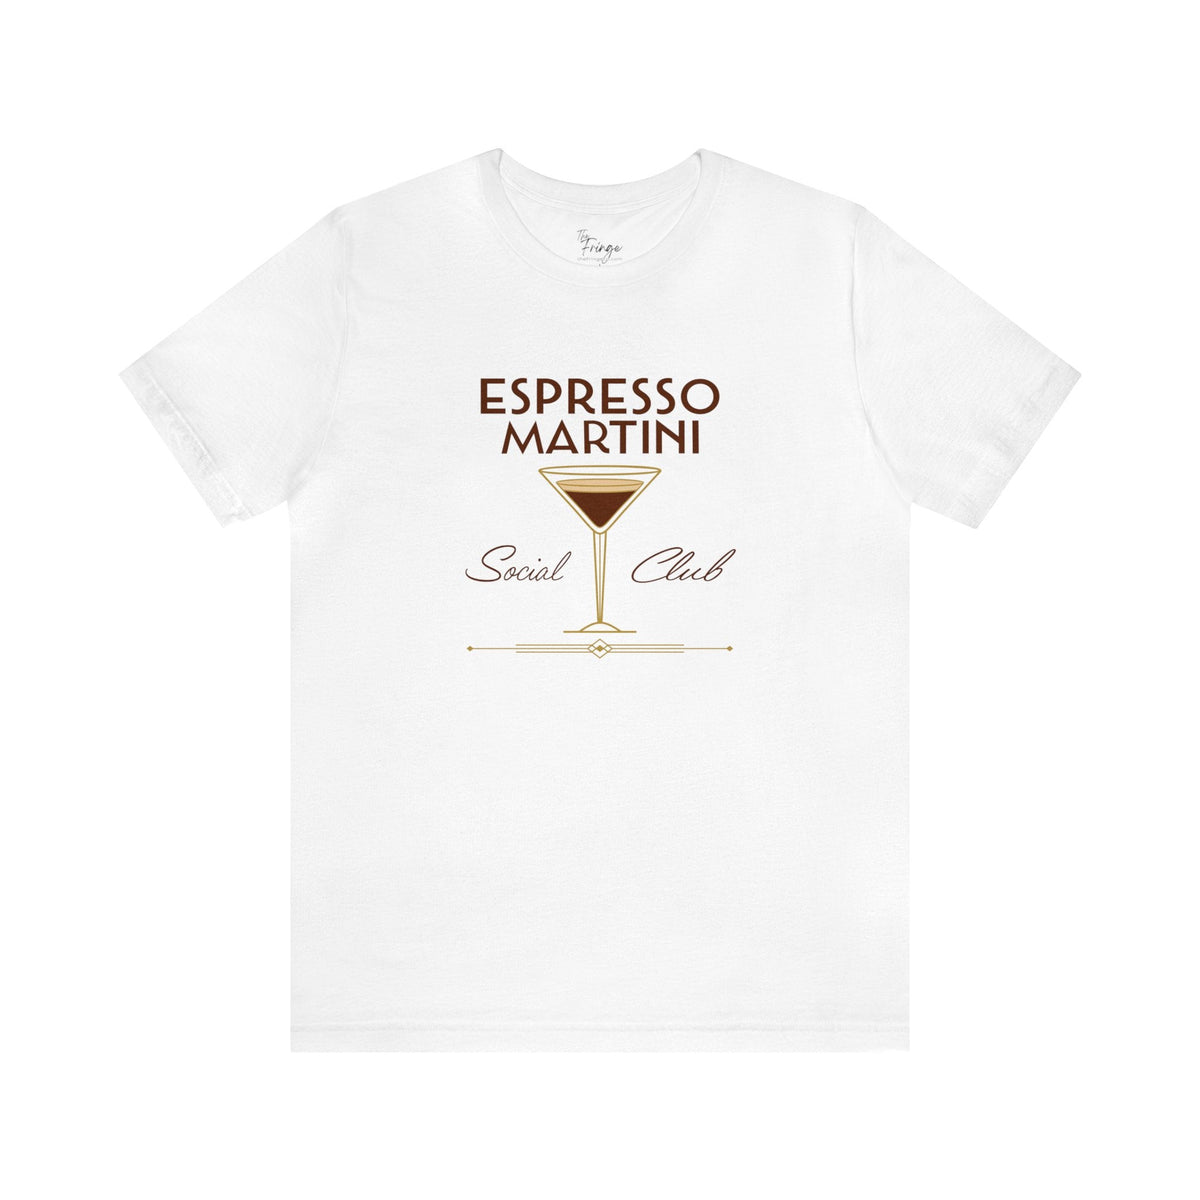 Espresso Martini Social Club Graphic Tee | Girls Night | Cocktail Lover | Rooftop Bar Life T-Shirt TheFringeCultureCollective